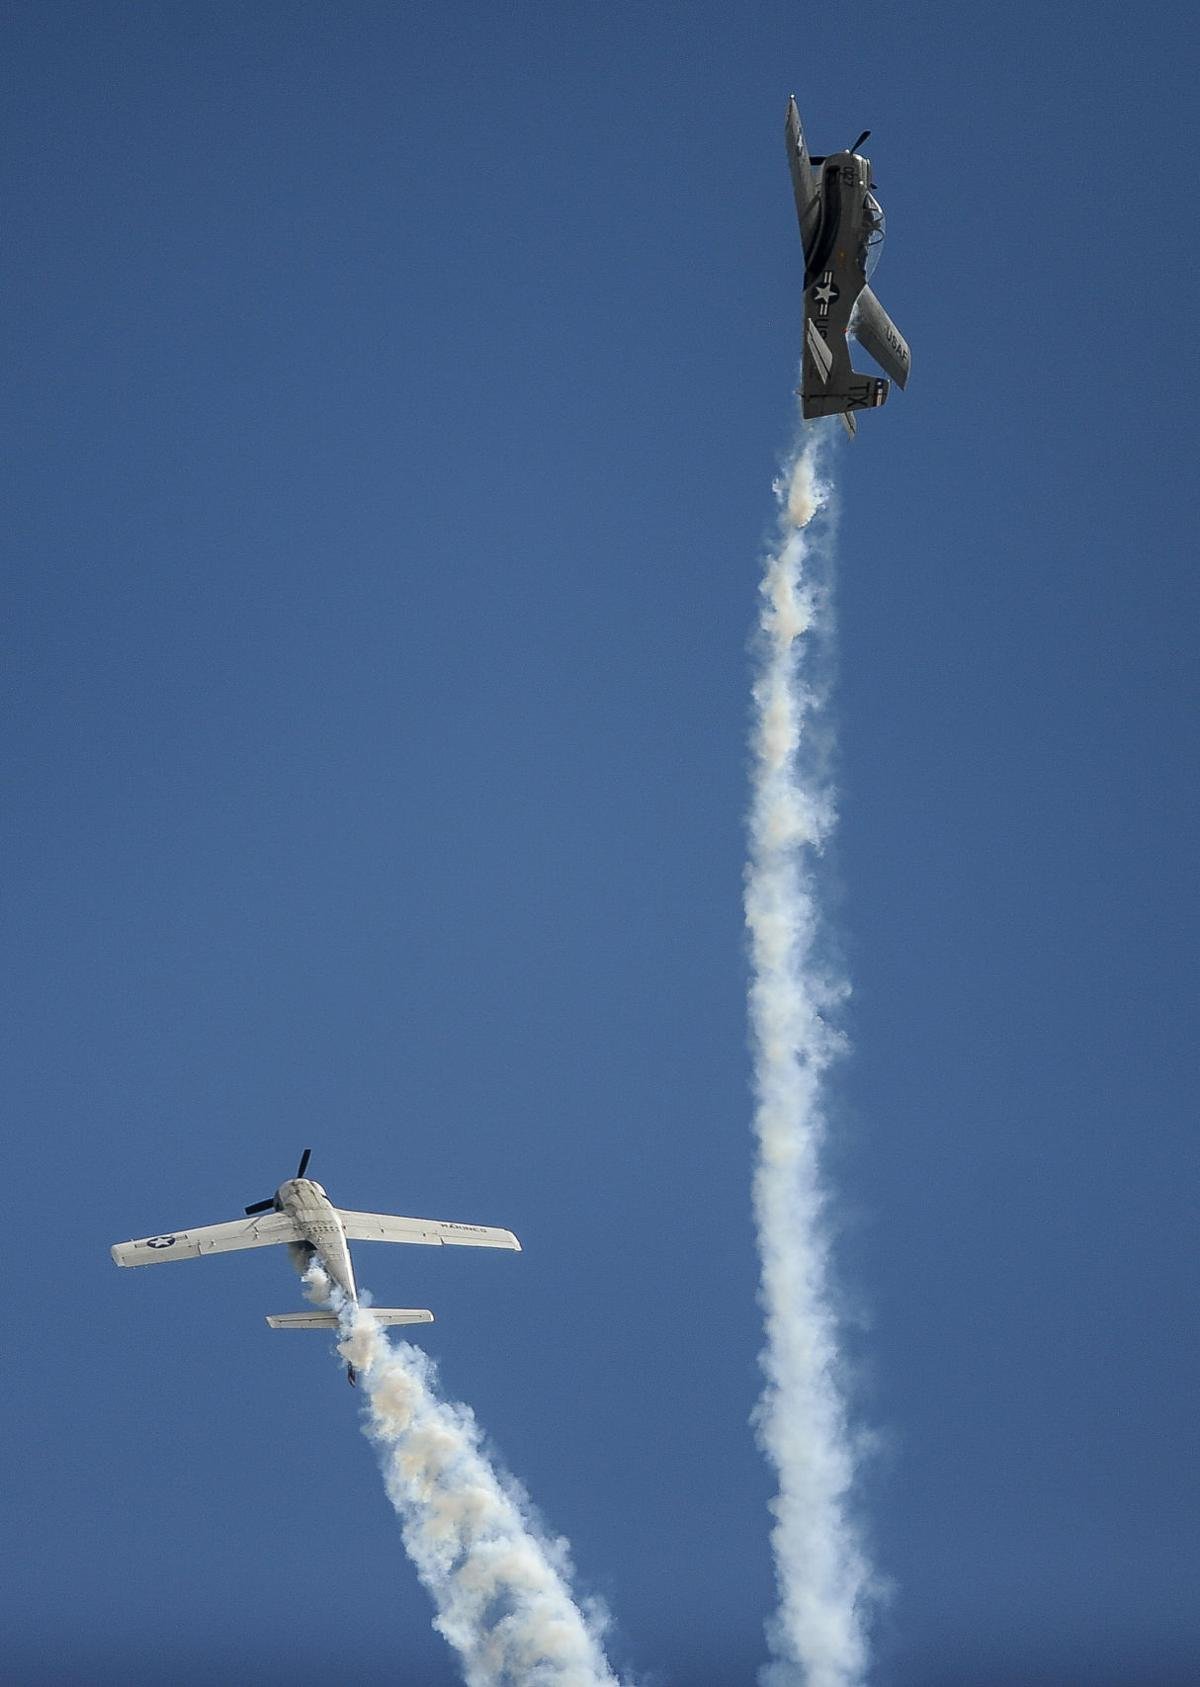 Pikes Peak Regional Air Show is back to thrill fans of flight Arts